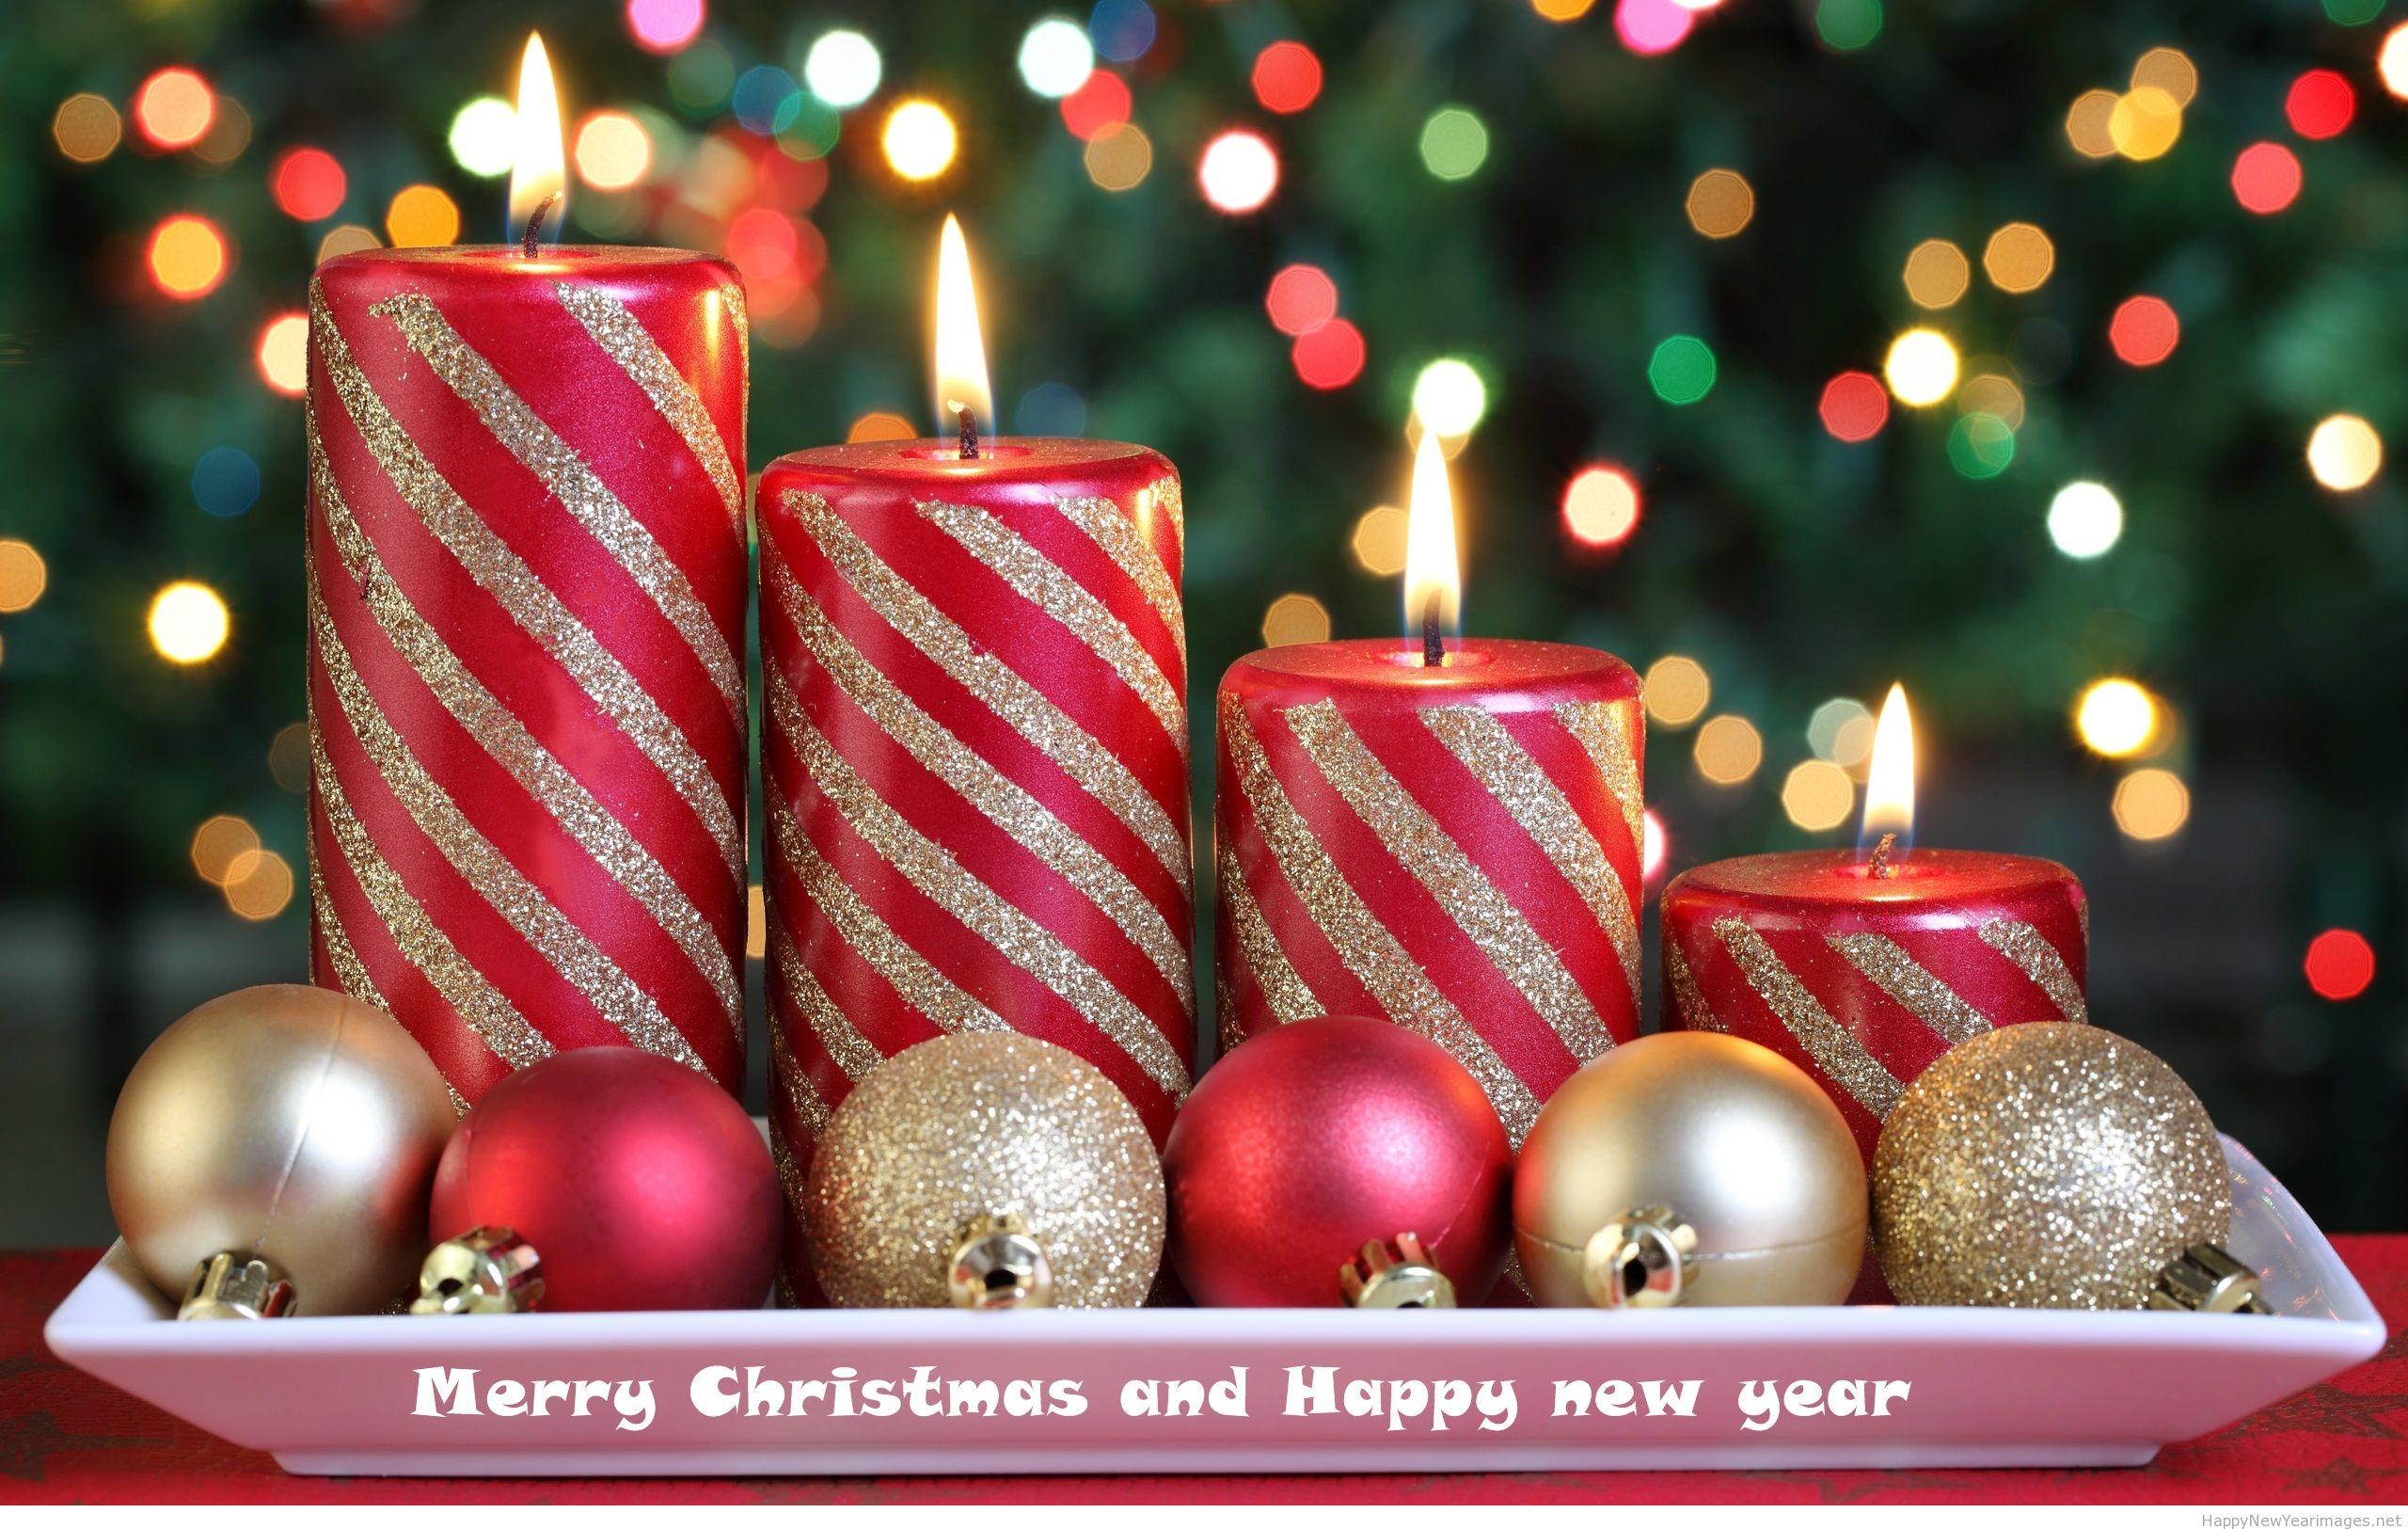 Merry Christmas and happy new year candle wallpaper 2014 2015